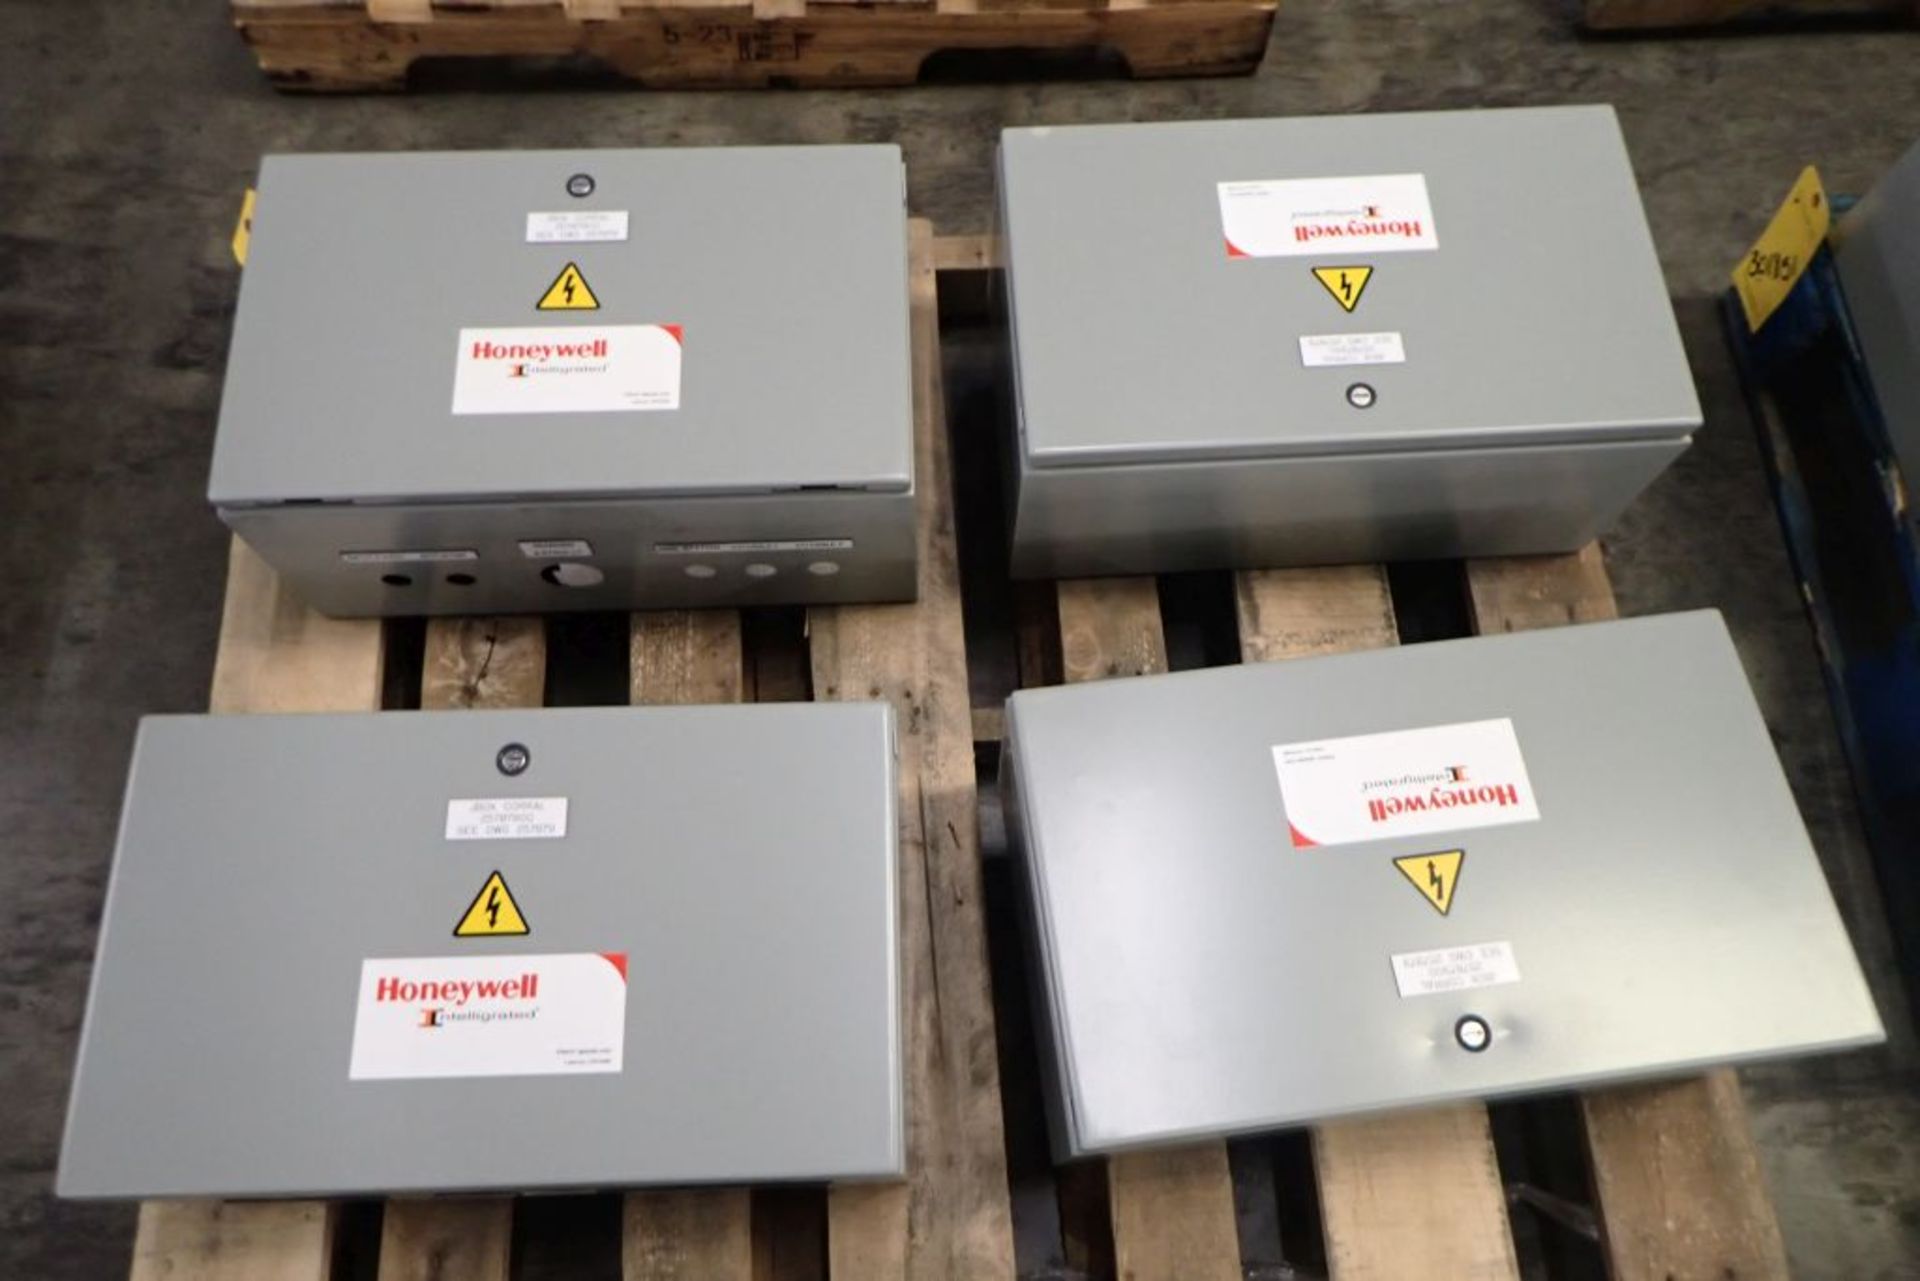 Lot of (4) Hoffman Nvent Industrial Control Panel Enclosures with Contents - Image 2 of 6